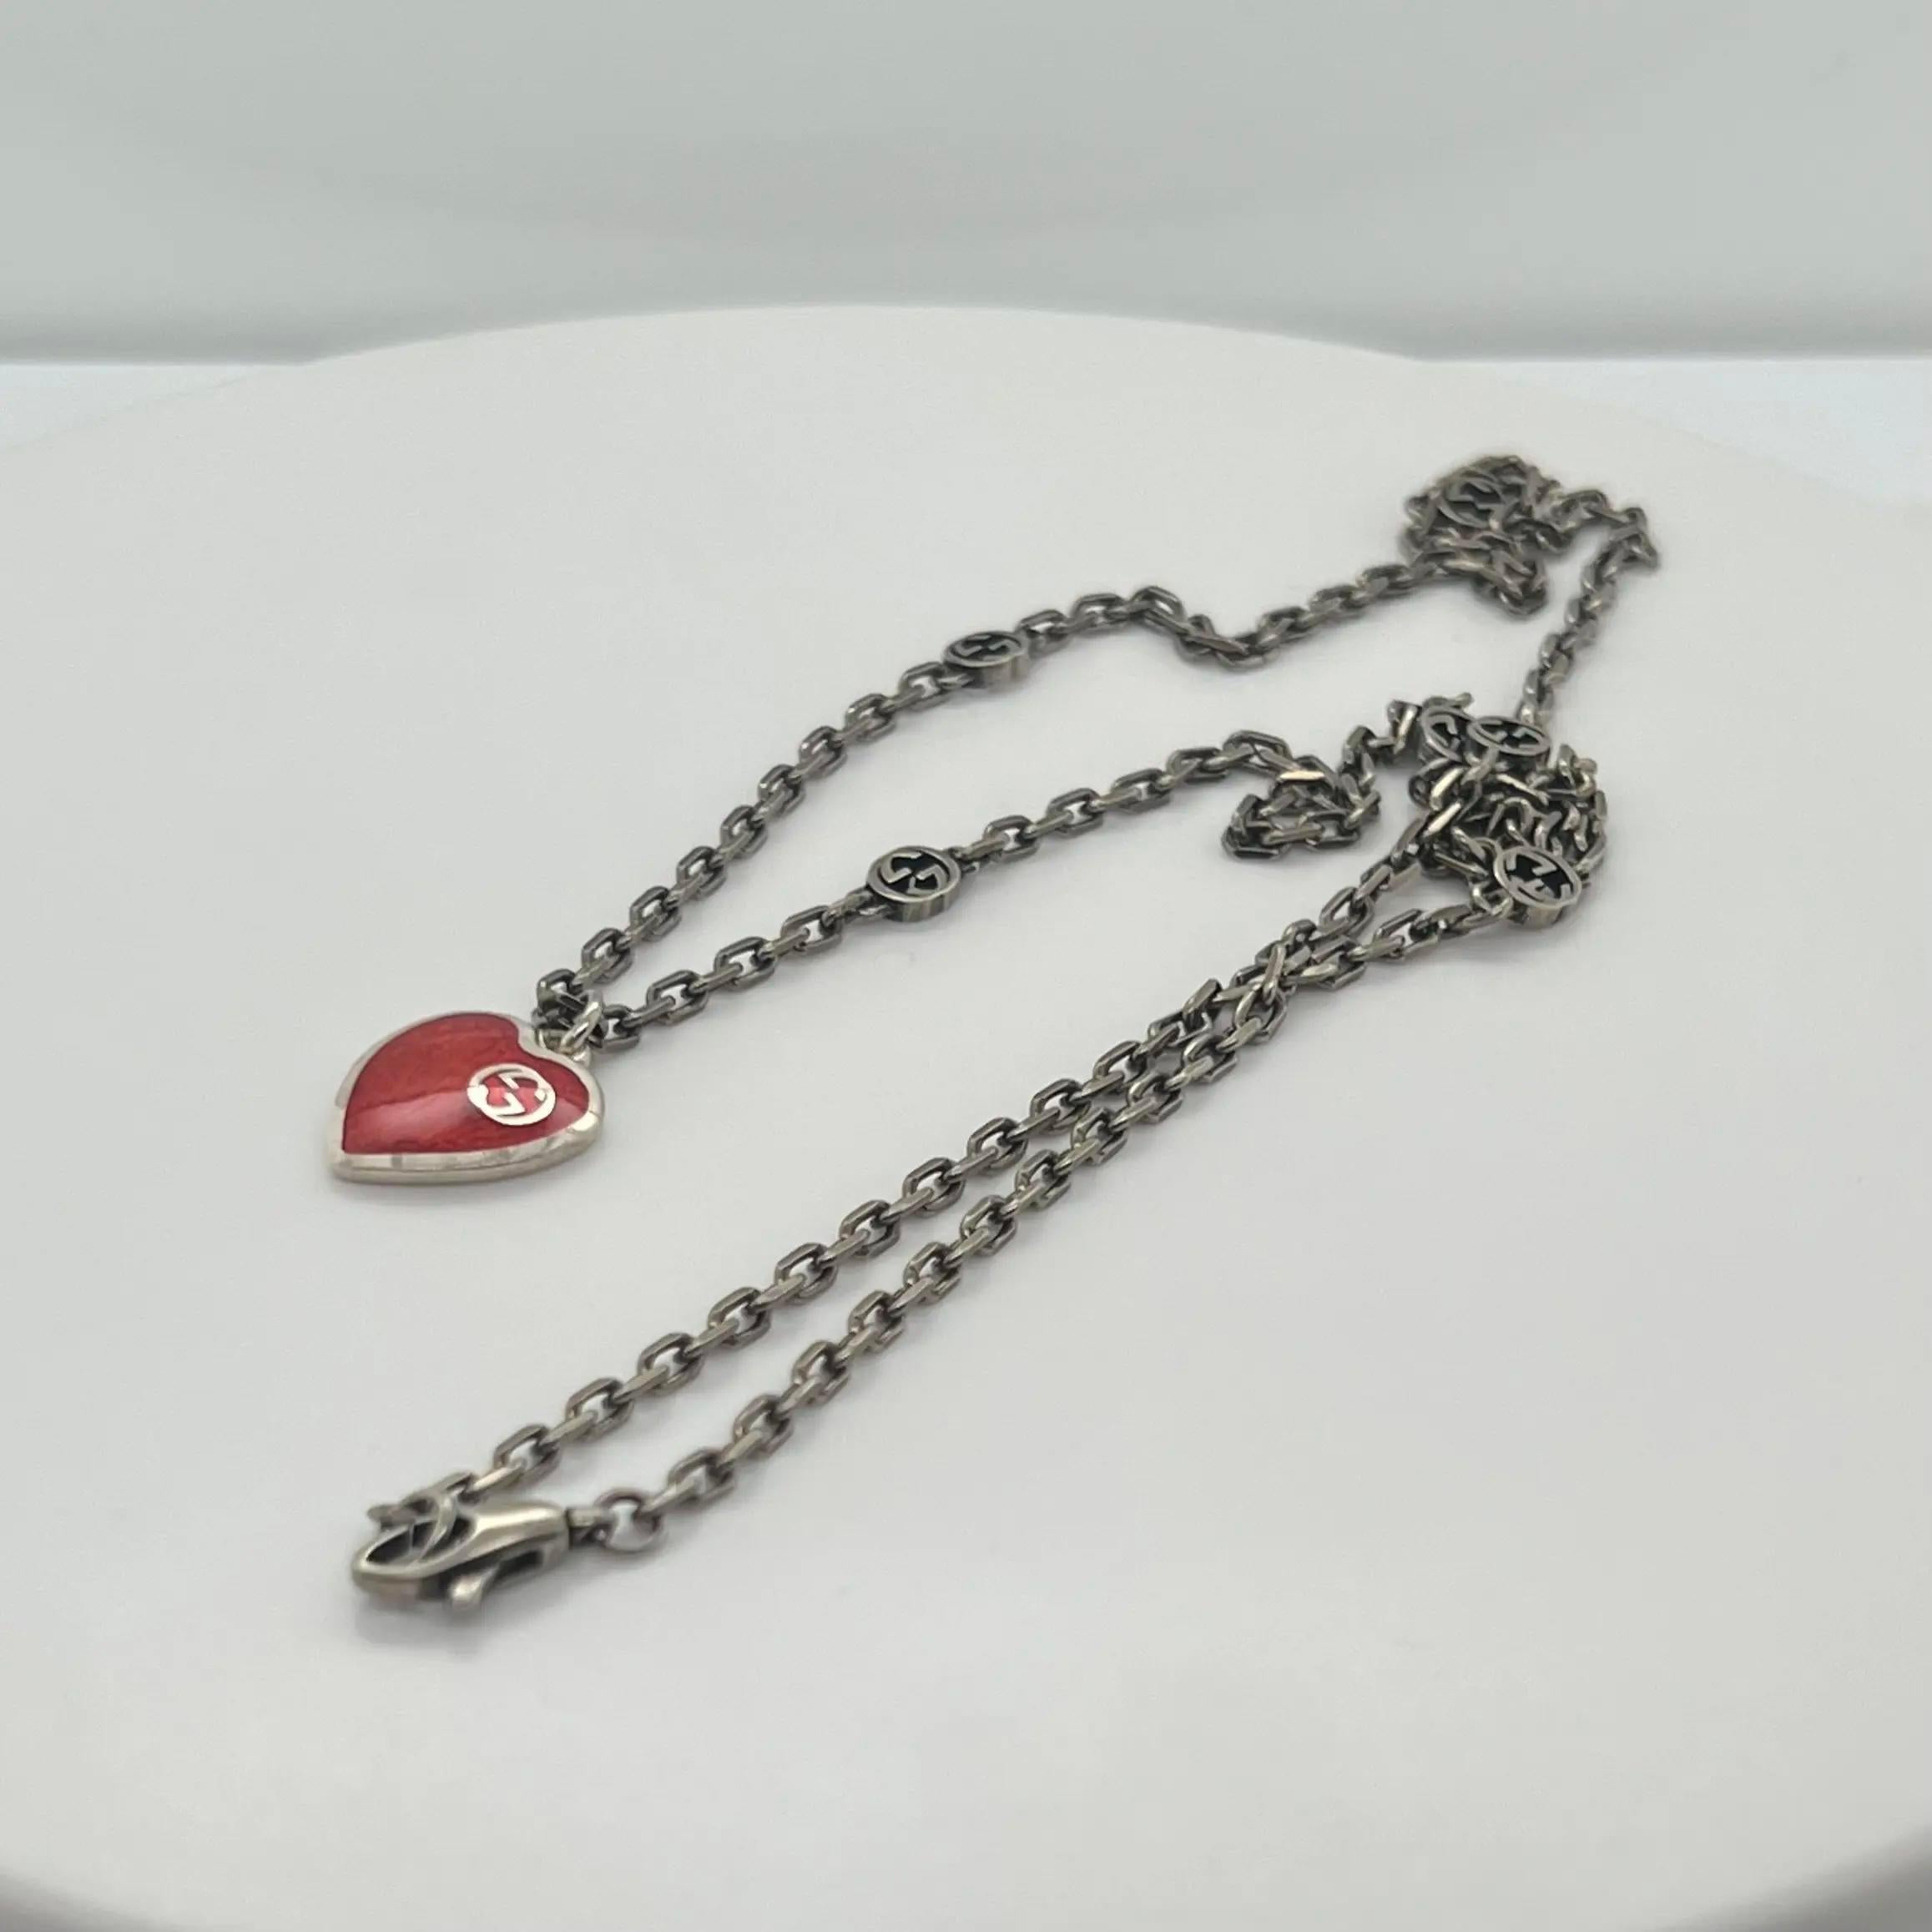 This Beautiful GUCCI necklace is imbued throughout with the emblematic Interlocking G motif with an engraved heart pendant animated by red enamel. Designed in 925 sterling silver with semi shiny finished chain. Secured with a lobster lock. Chain